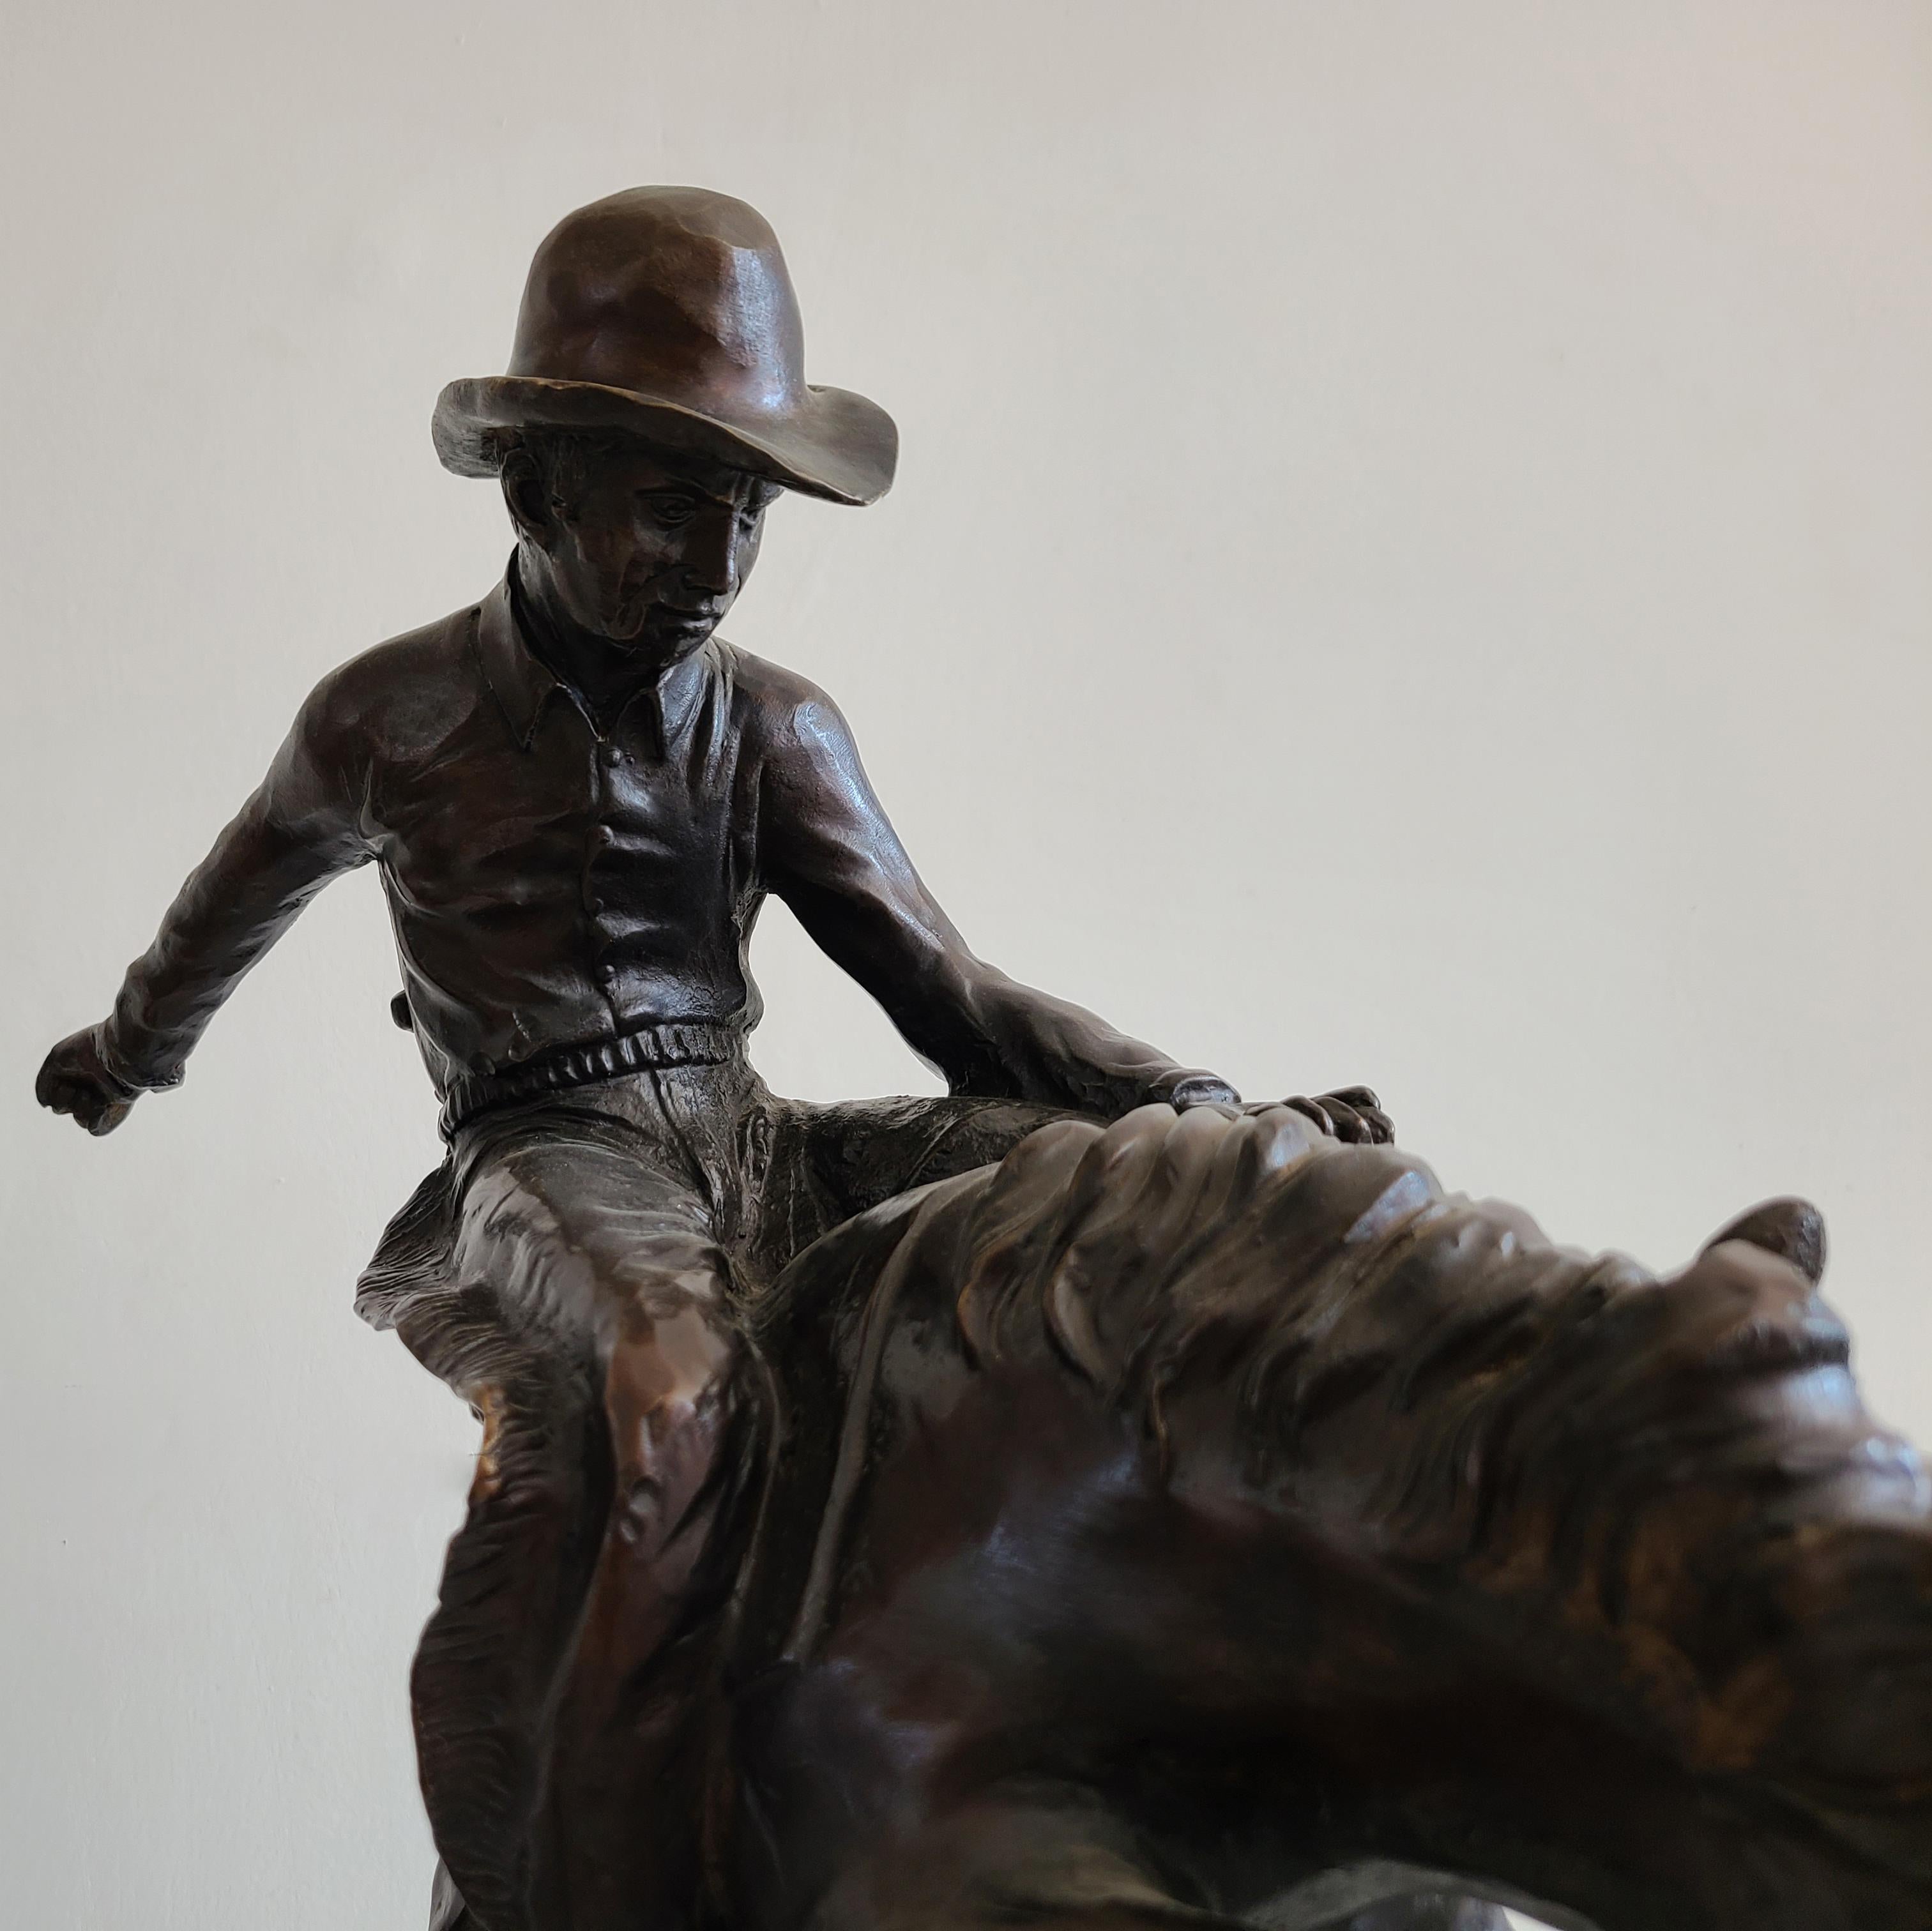 Bronze Cowboy Ridding Statue Bronze Outlaw Statue by Frederic Remington Replica Famous Art Crafts For Home Decor Ornament Gifts